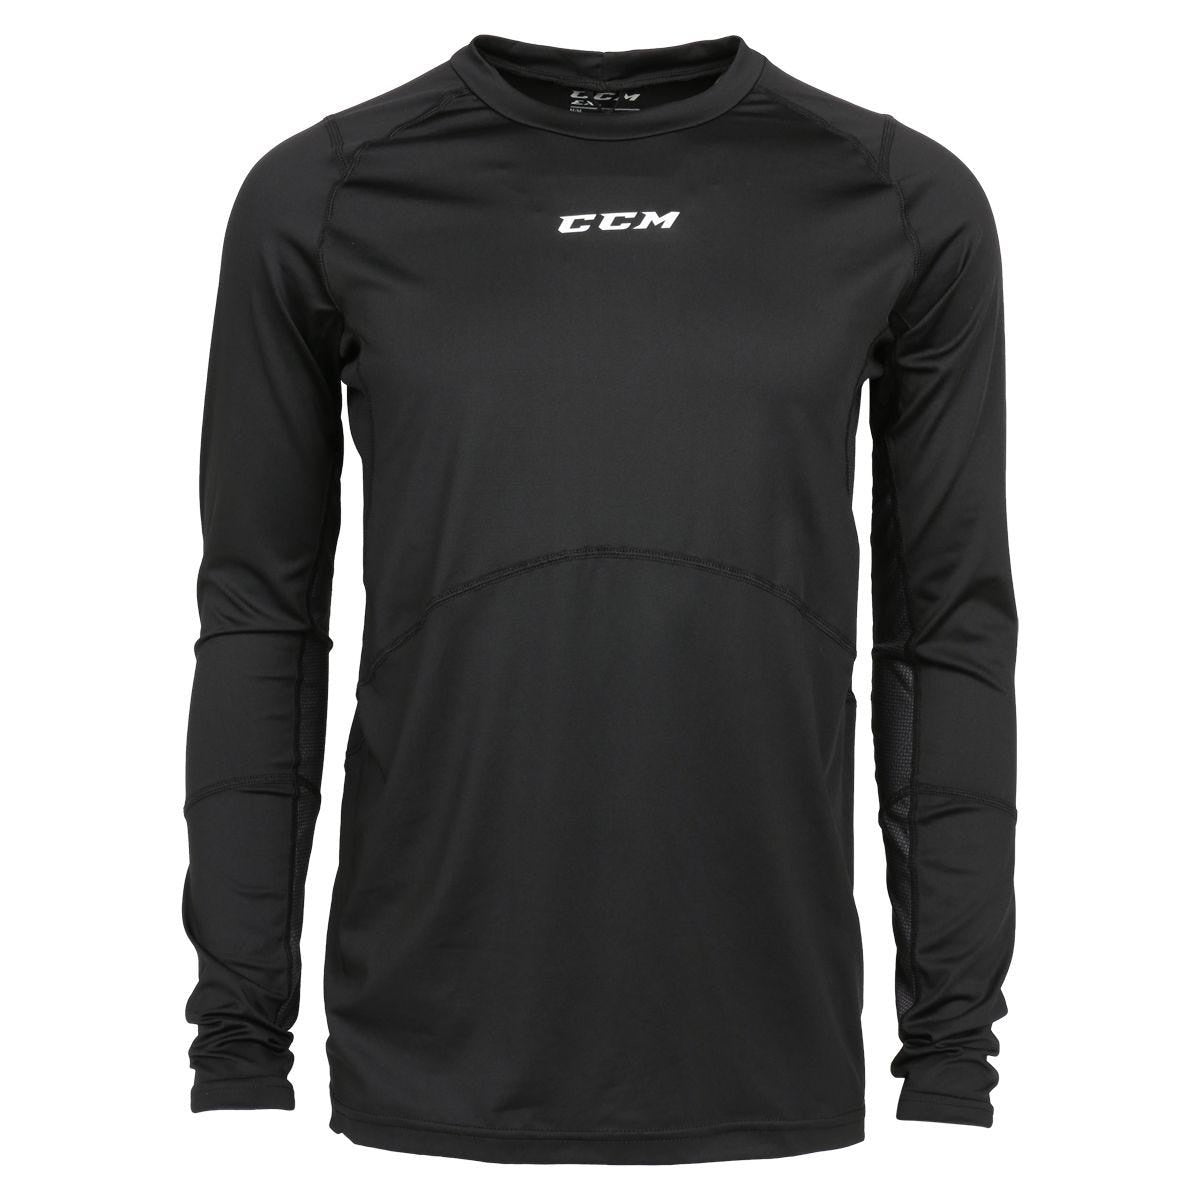 CCM Senior Long Sleeve Compression Top with Grip